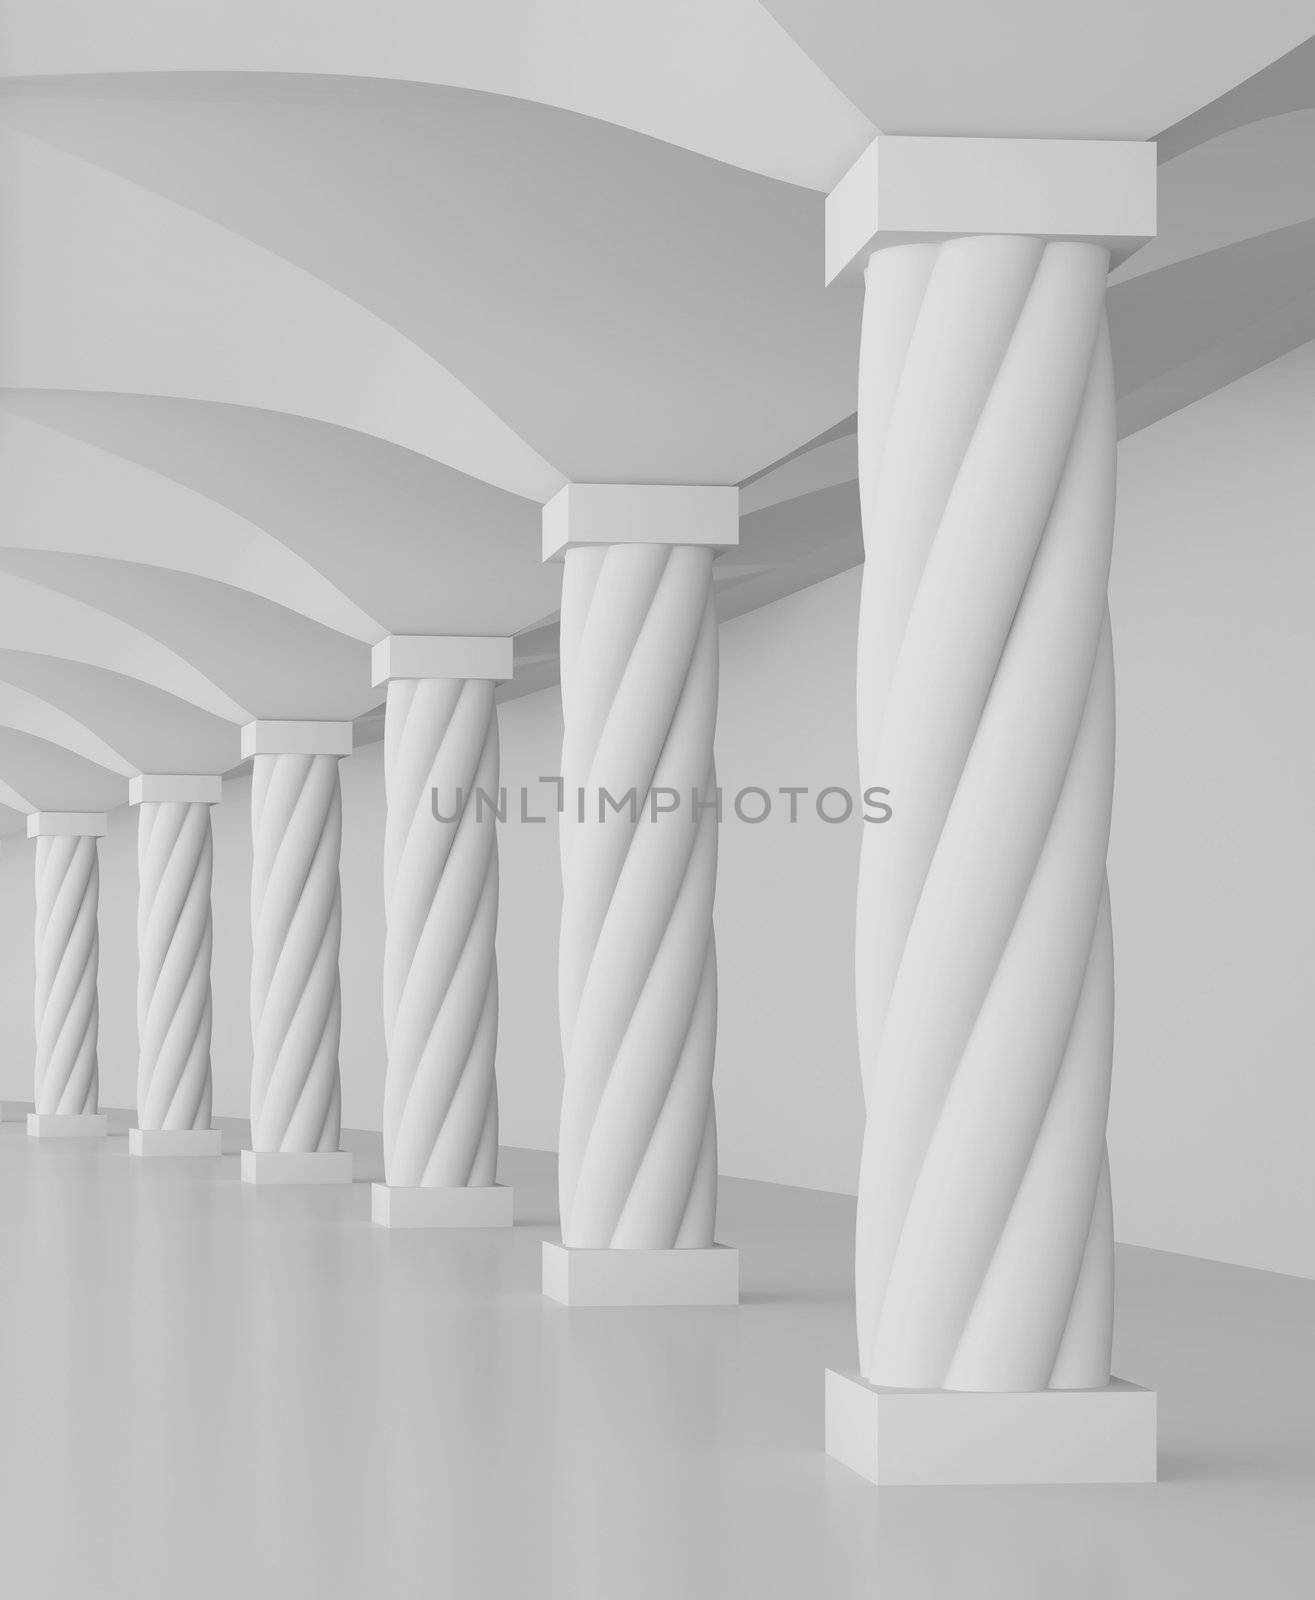 3d Illustration of Columns Hall or Architecture Background